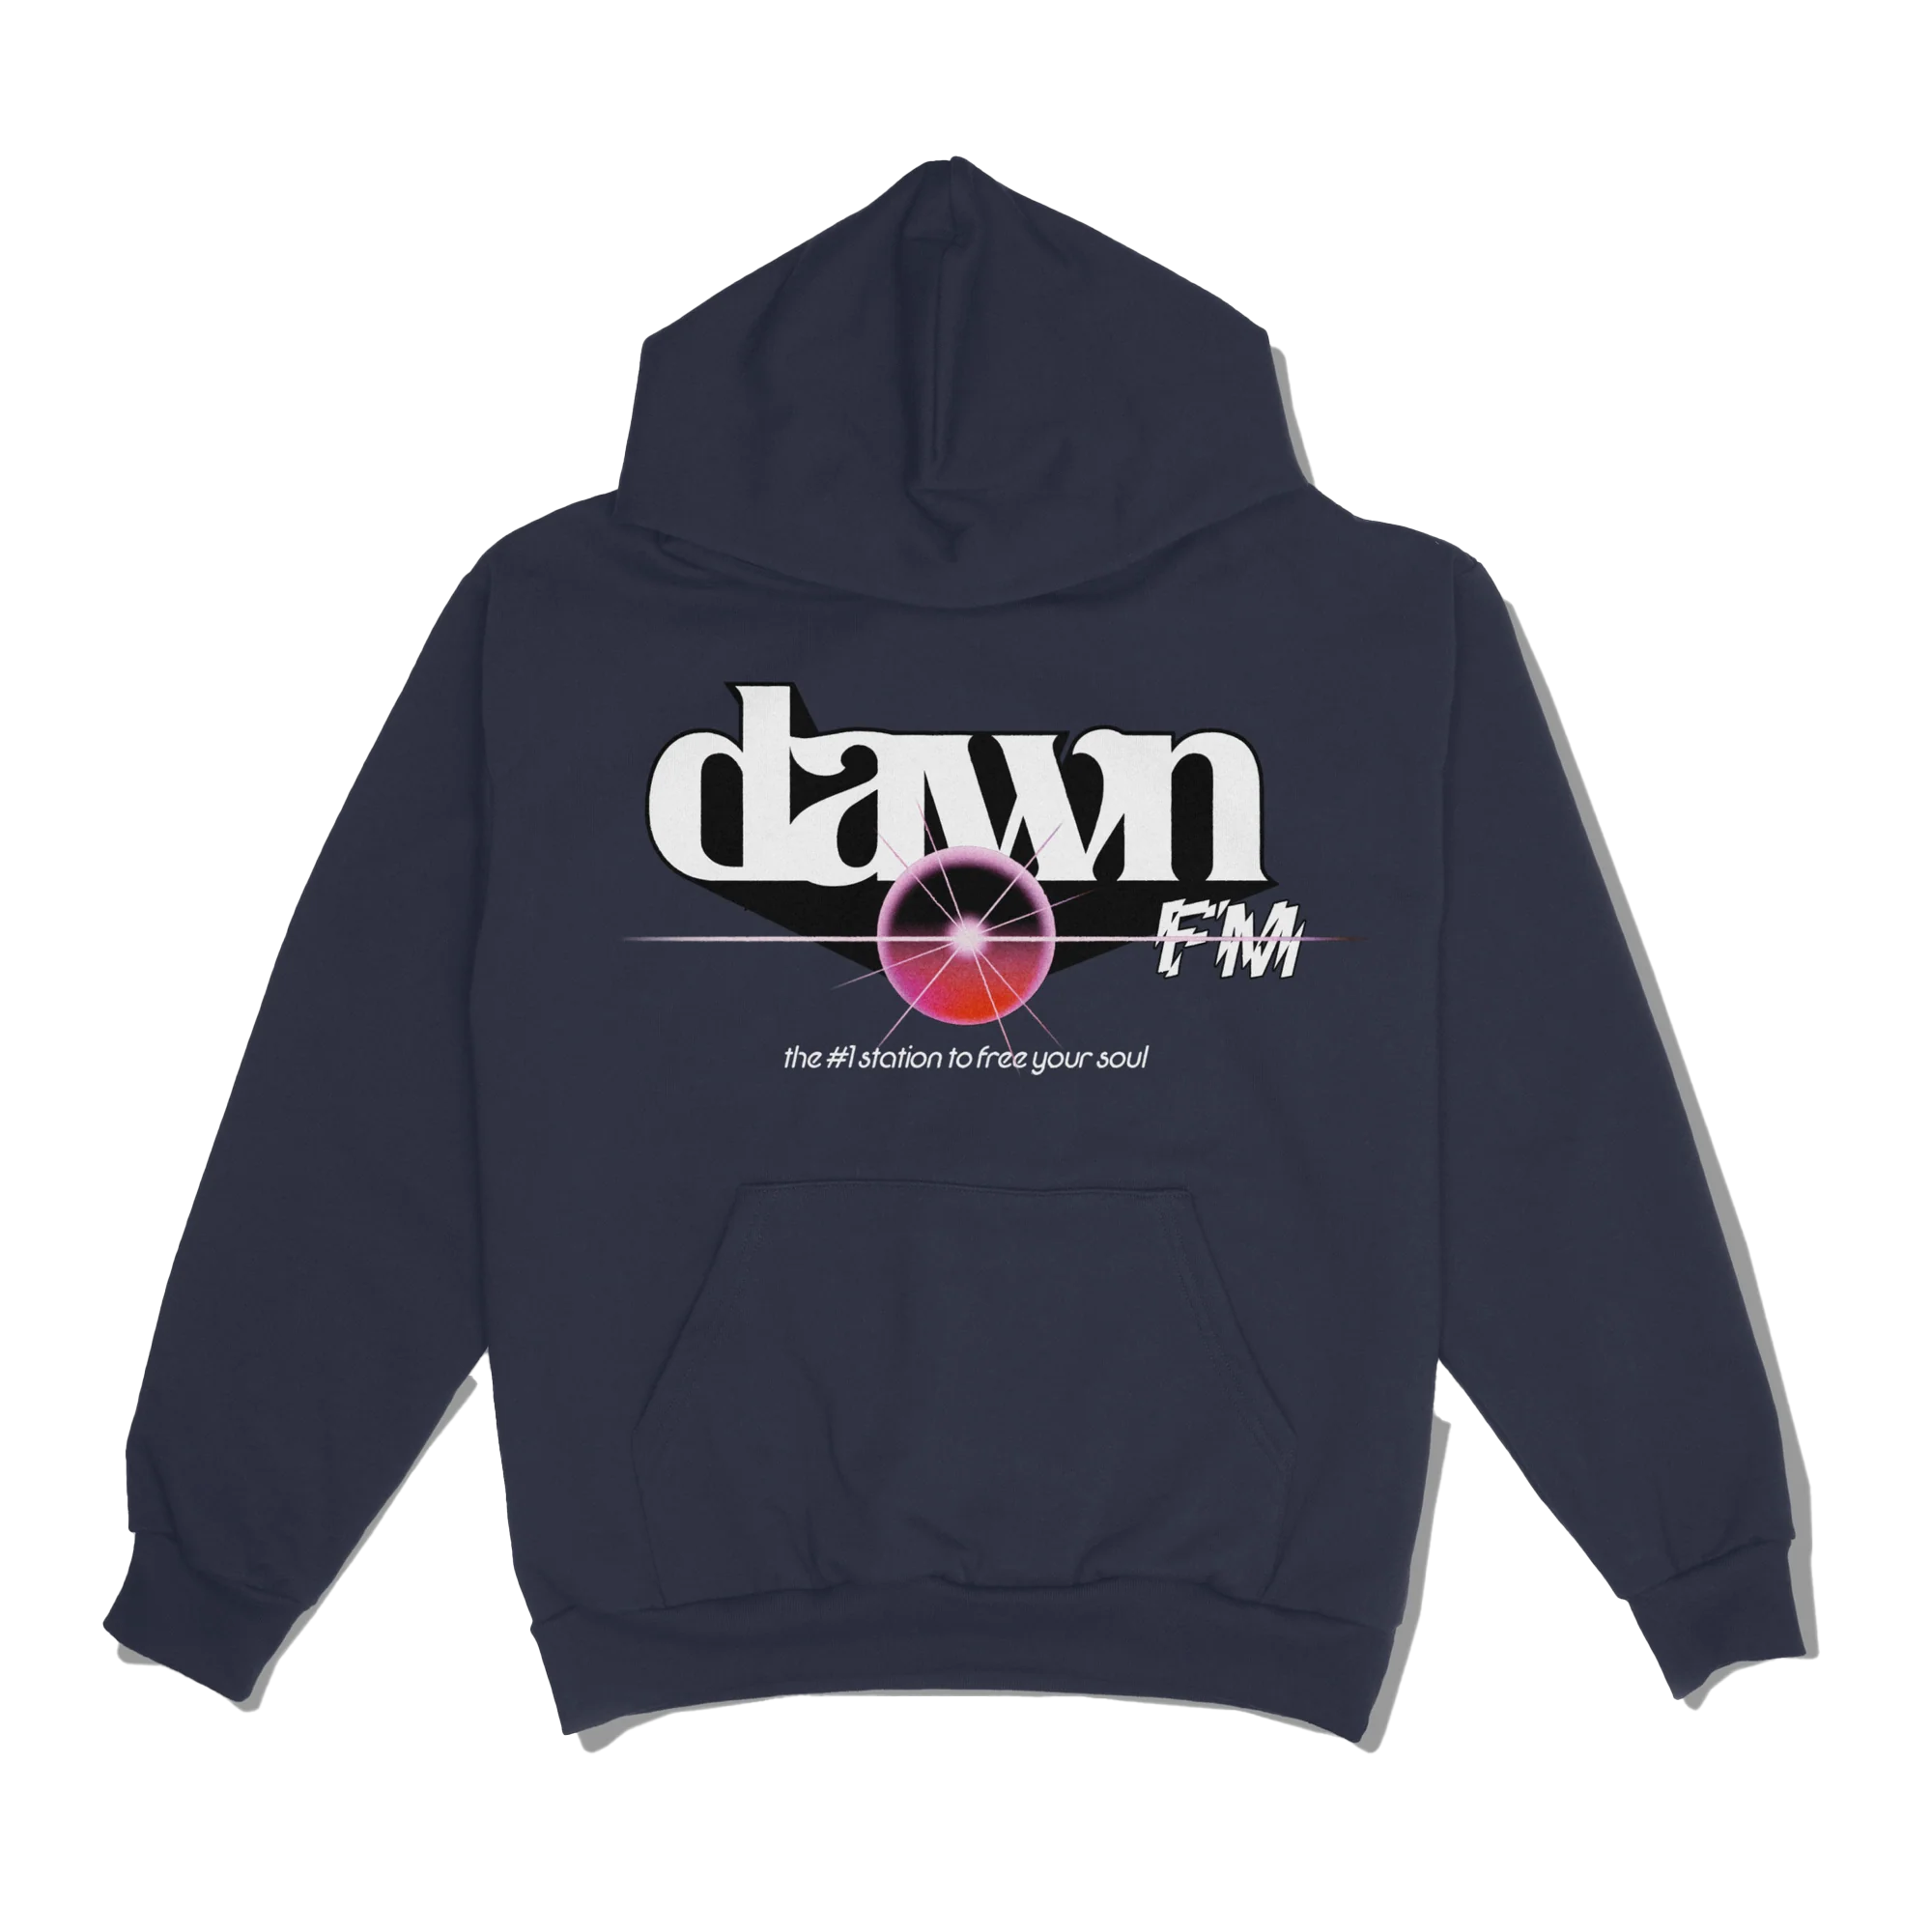 The Weeknd - Dawn Fm The #1 Station Pullover Hood